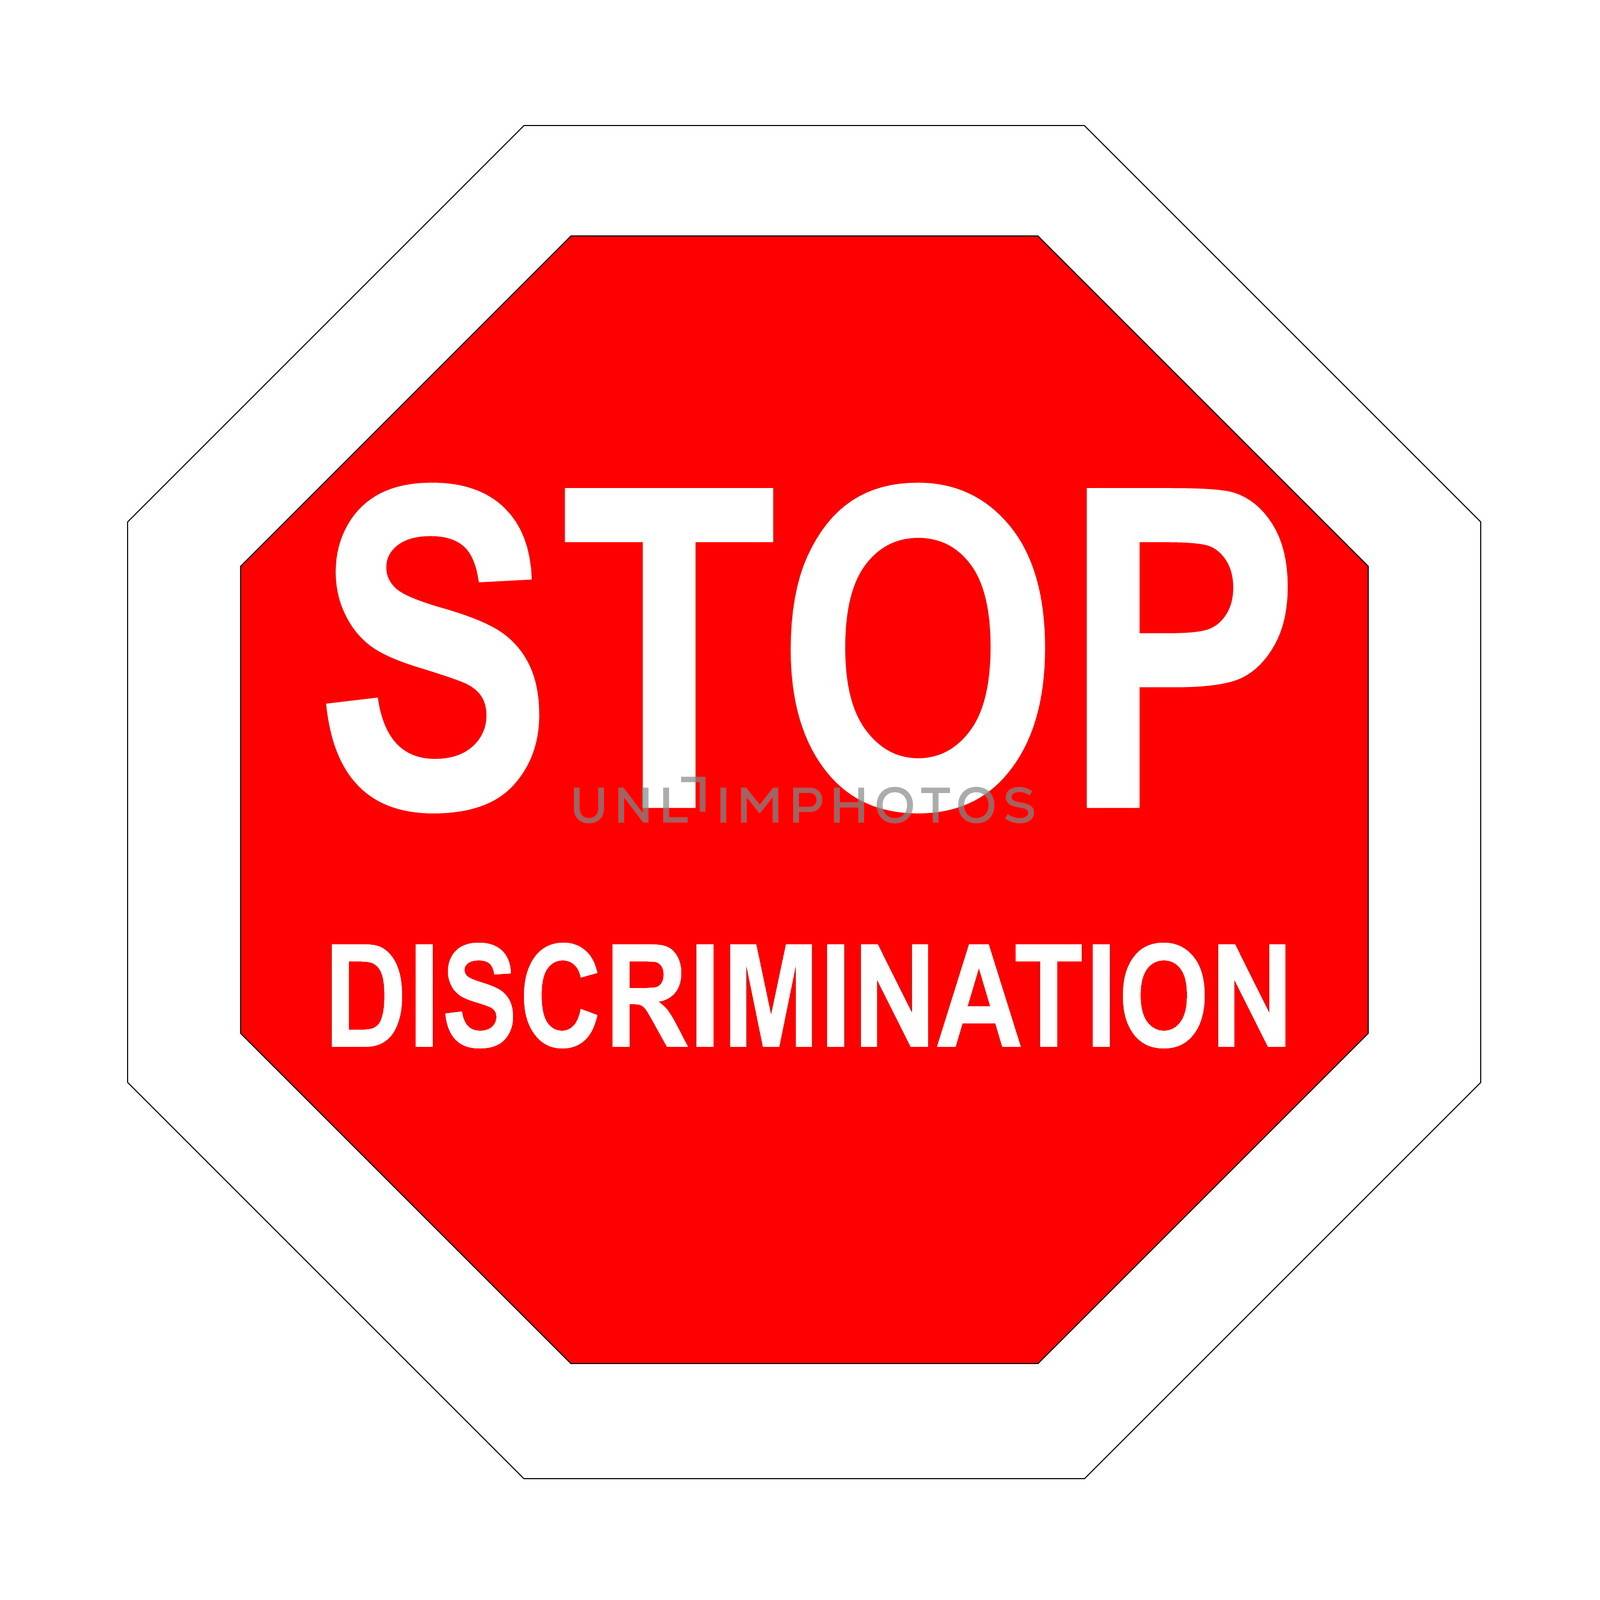 Stop roadsign with discrimination word inside in white background